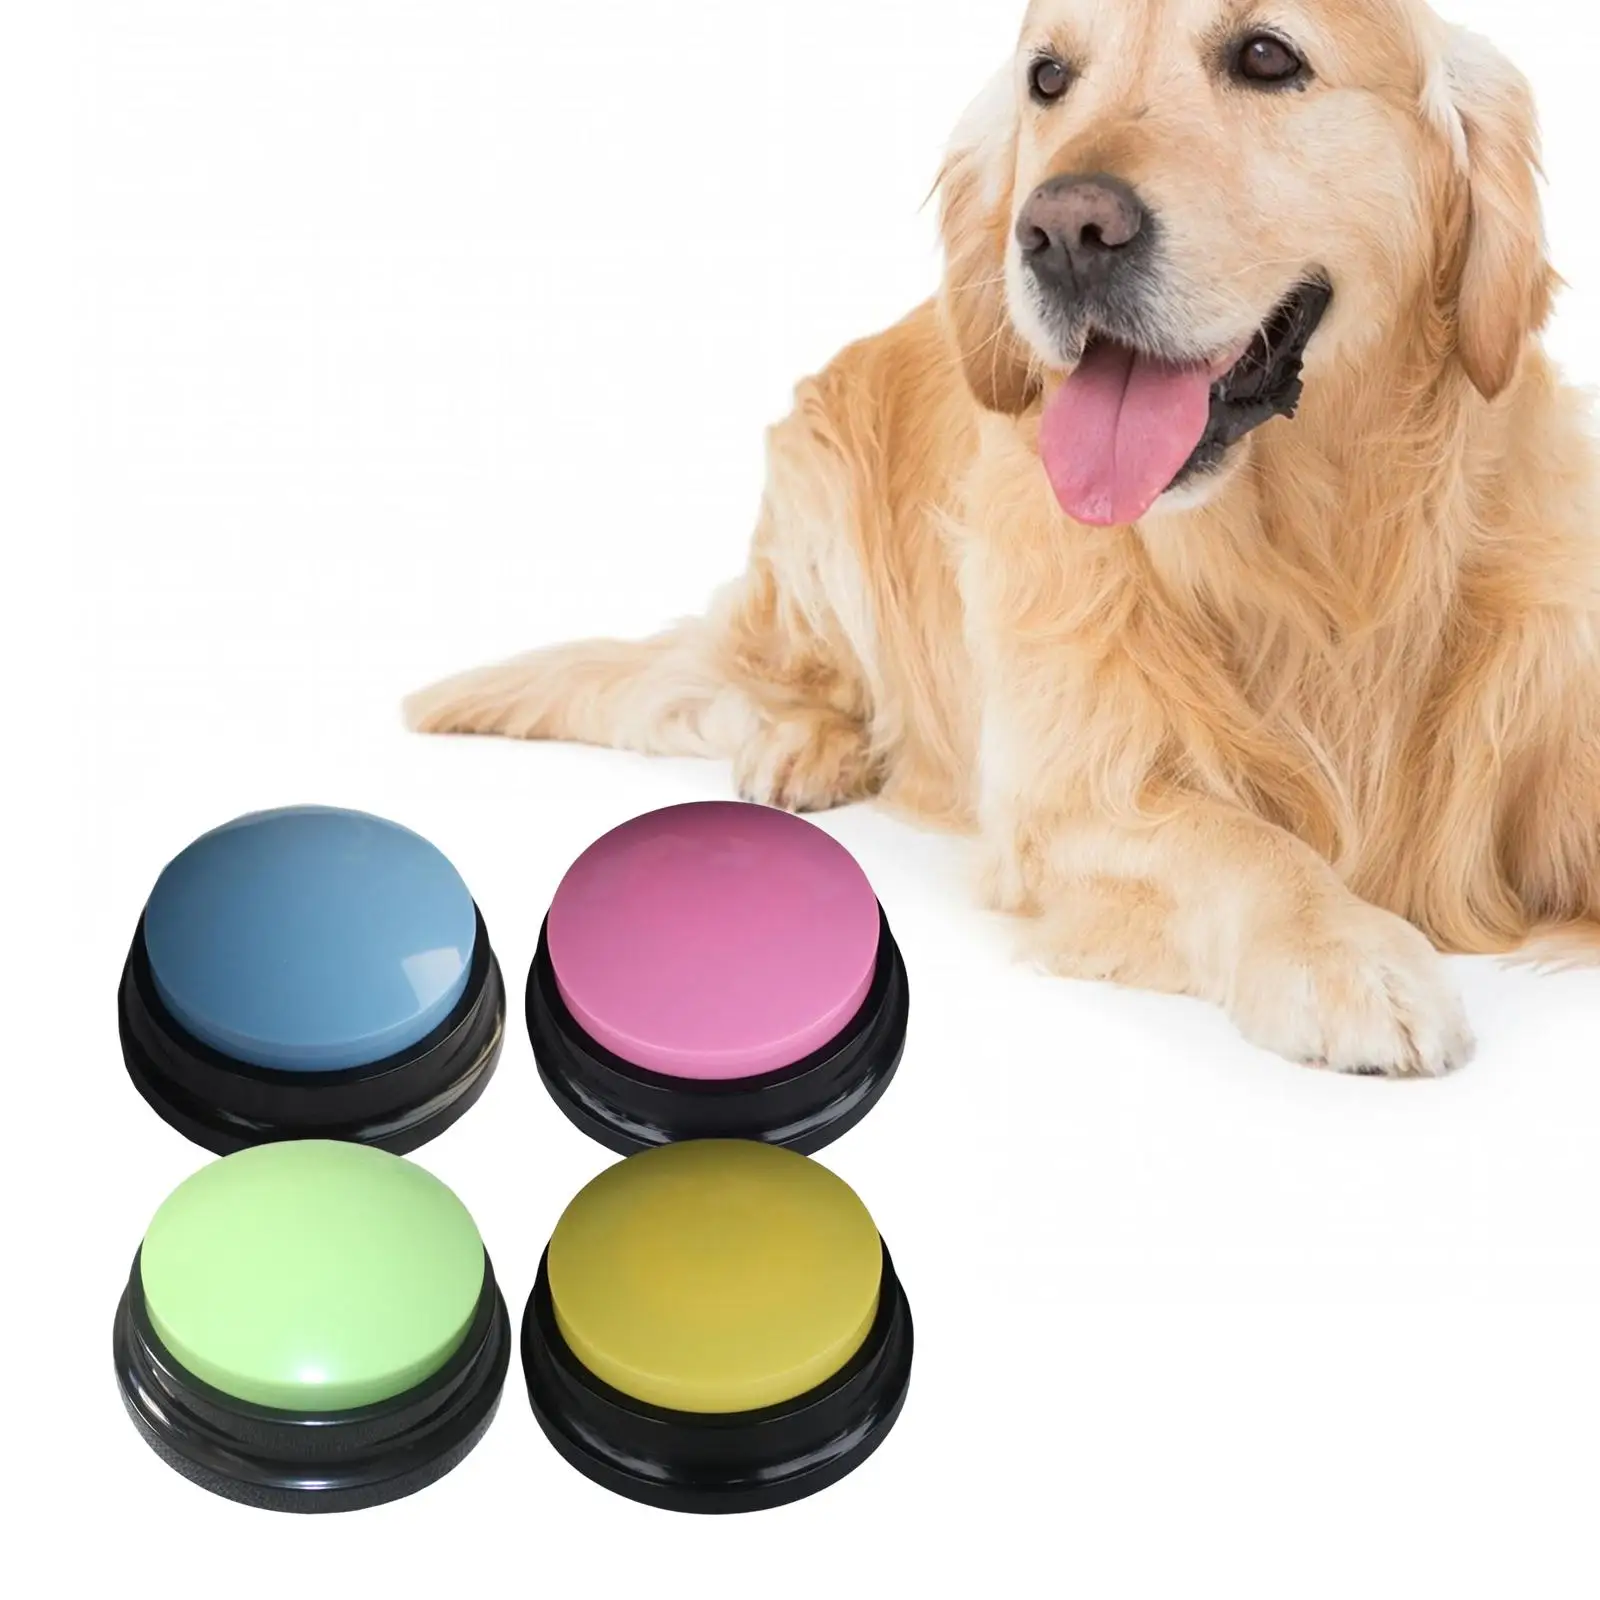 4x Recordable Dog Interactive Toy Noise Makers Squeaks Answer Buzzers Voice Recording Button for Puppy Kitten